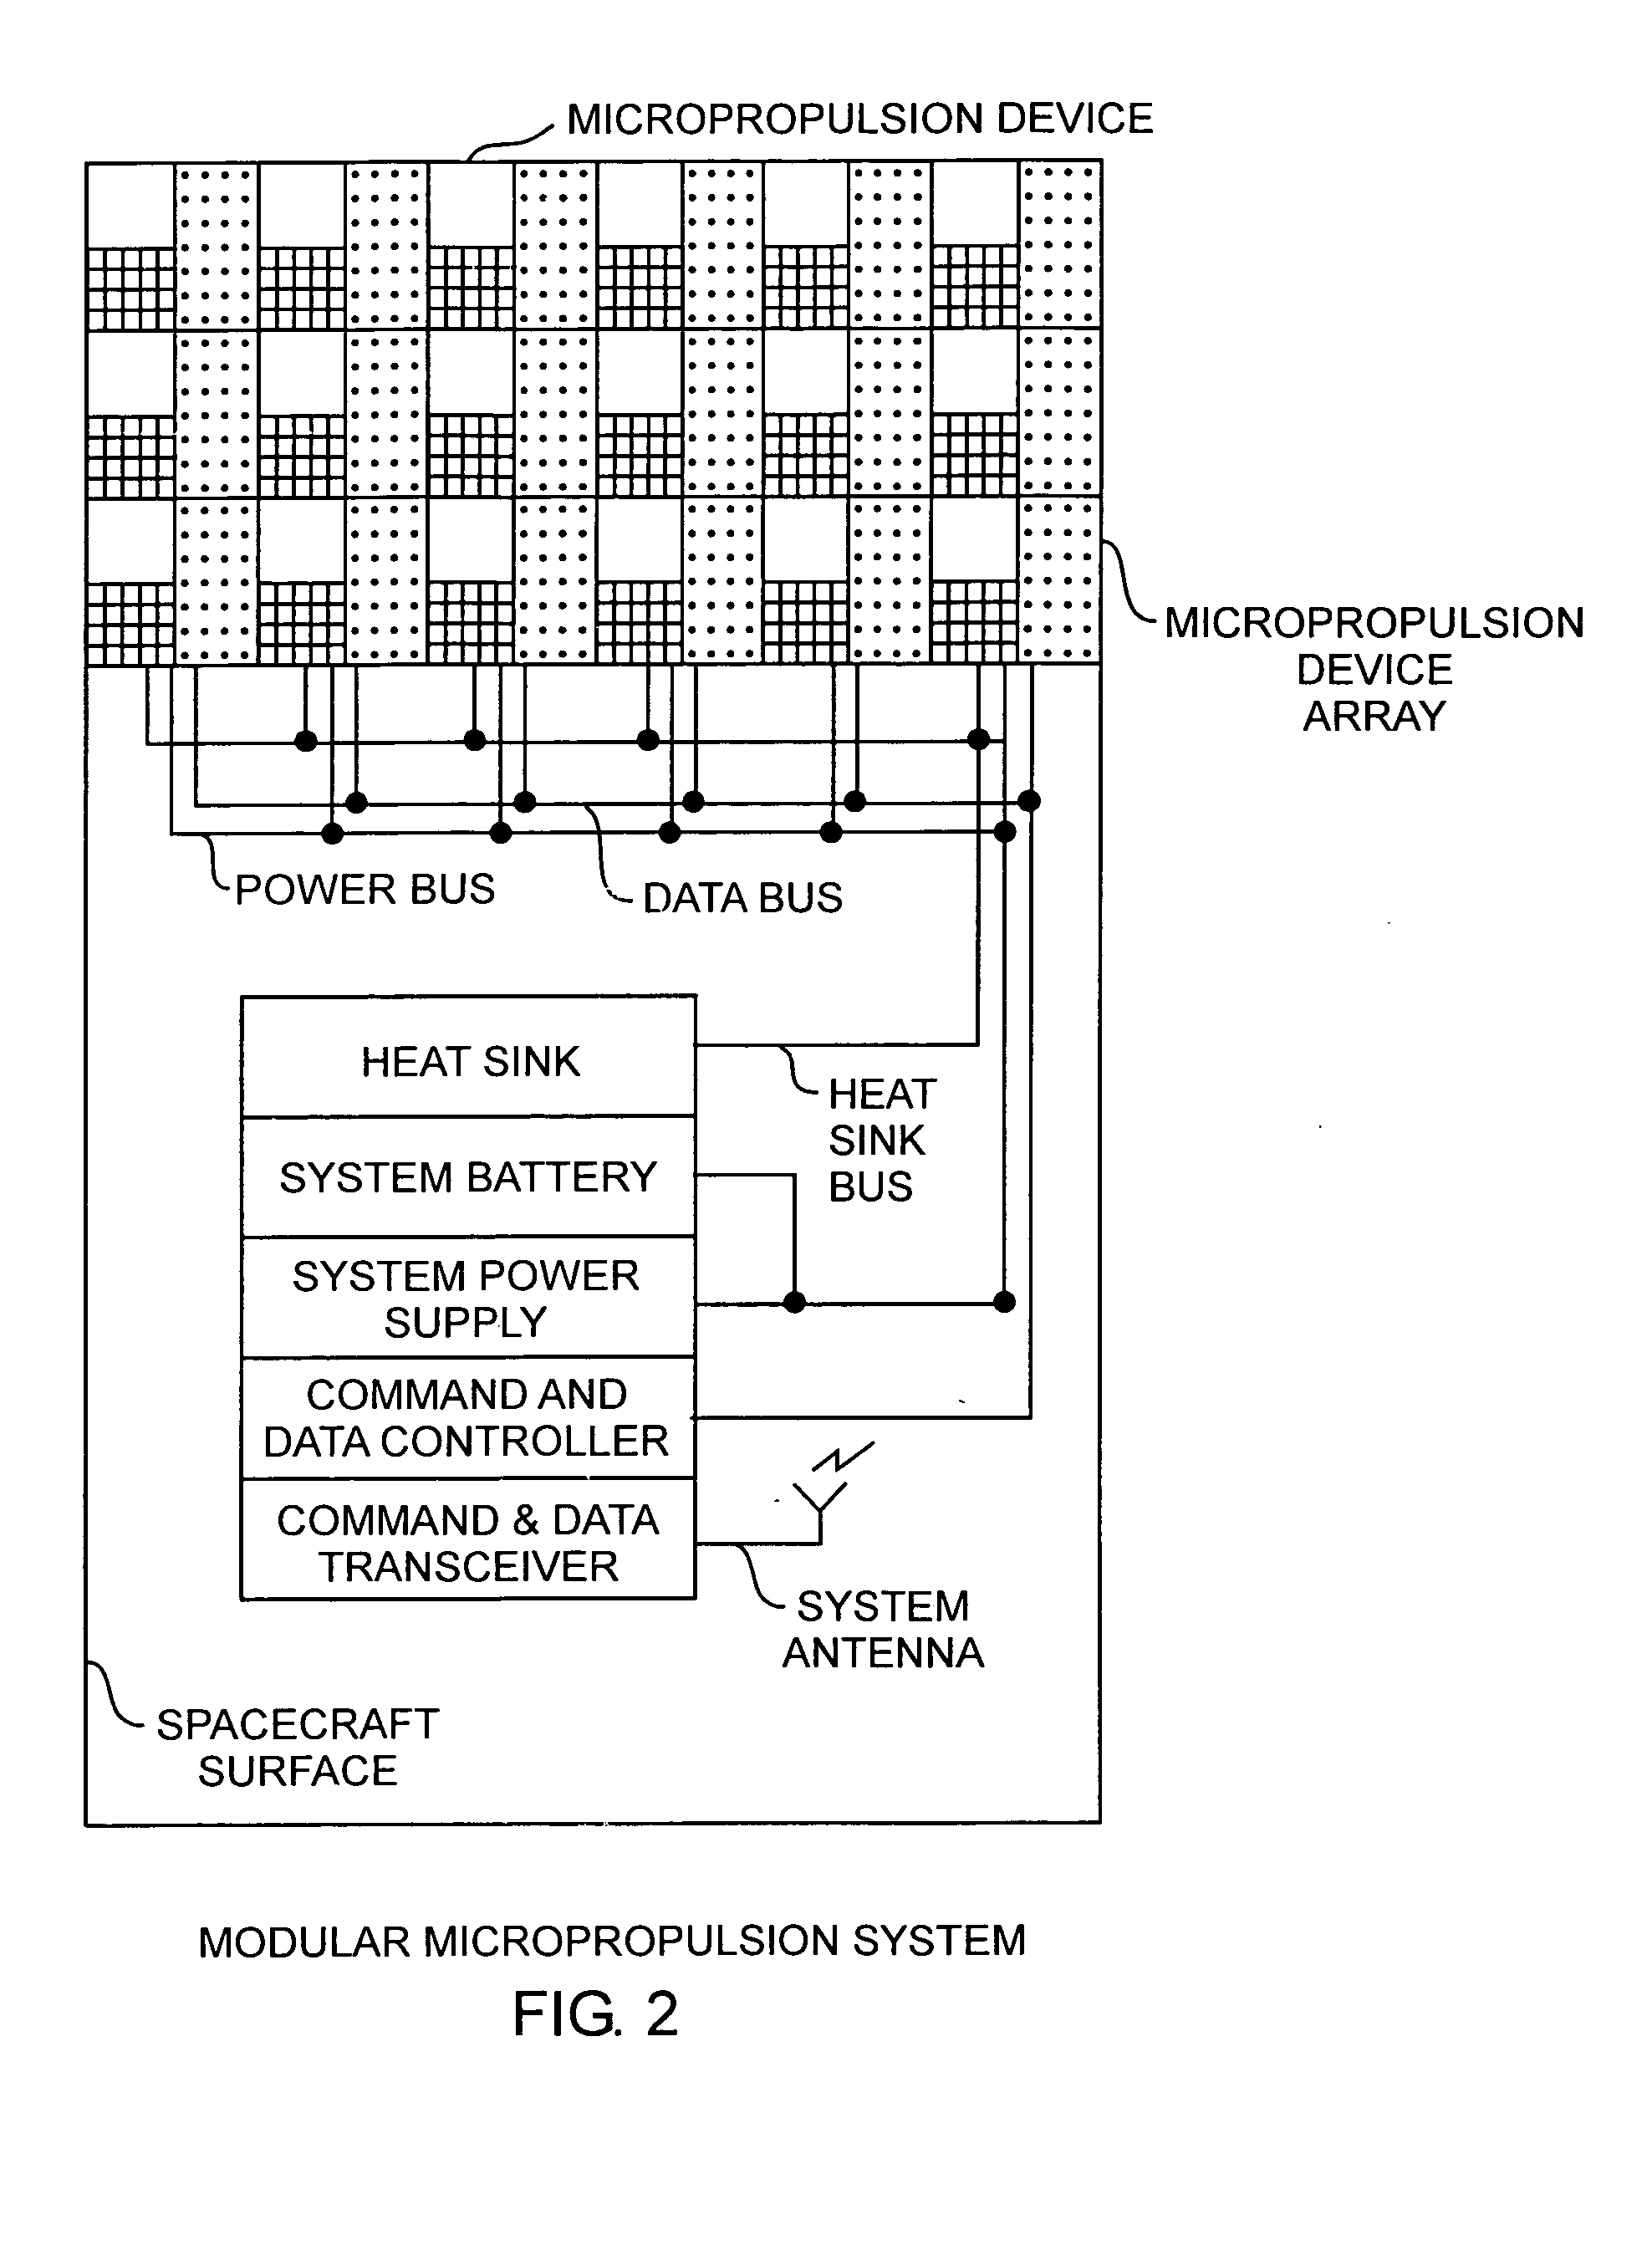 Modular micropropulsion device and system